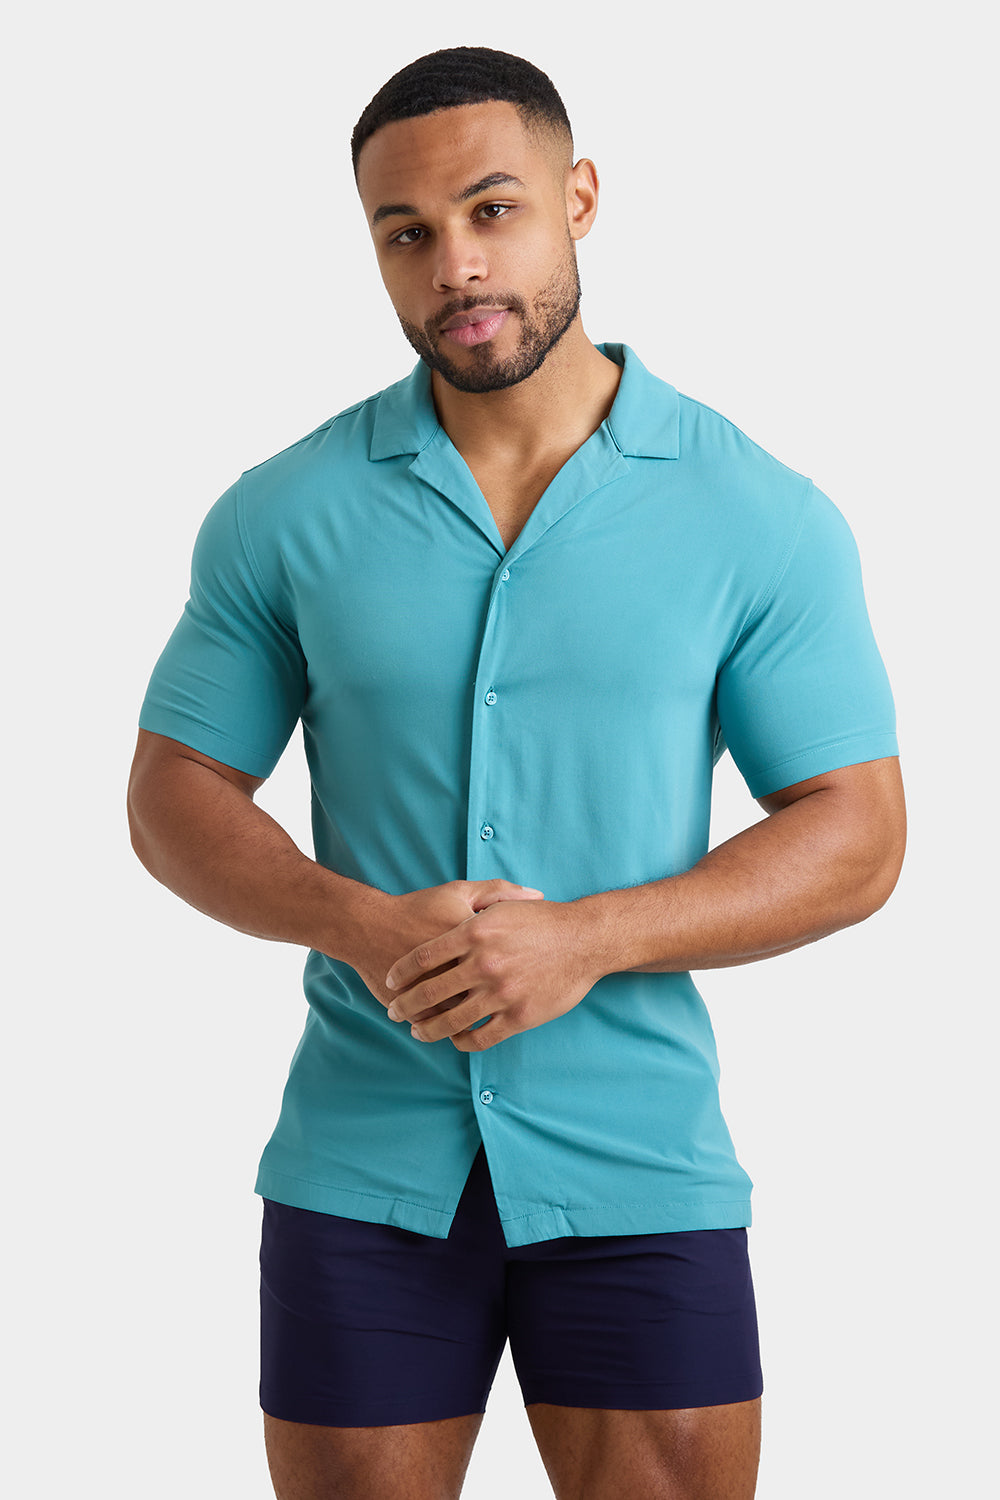 Muscle Fit Short Sleeve Viscose Shirt in Teal - TAILORED ATHLETE - ROW